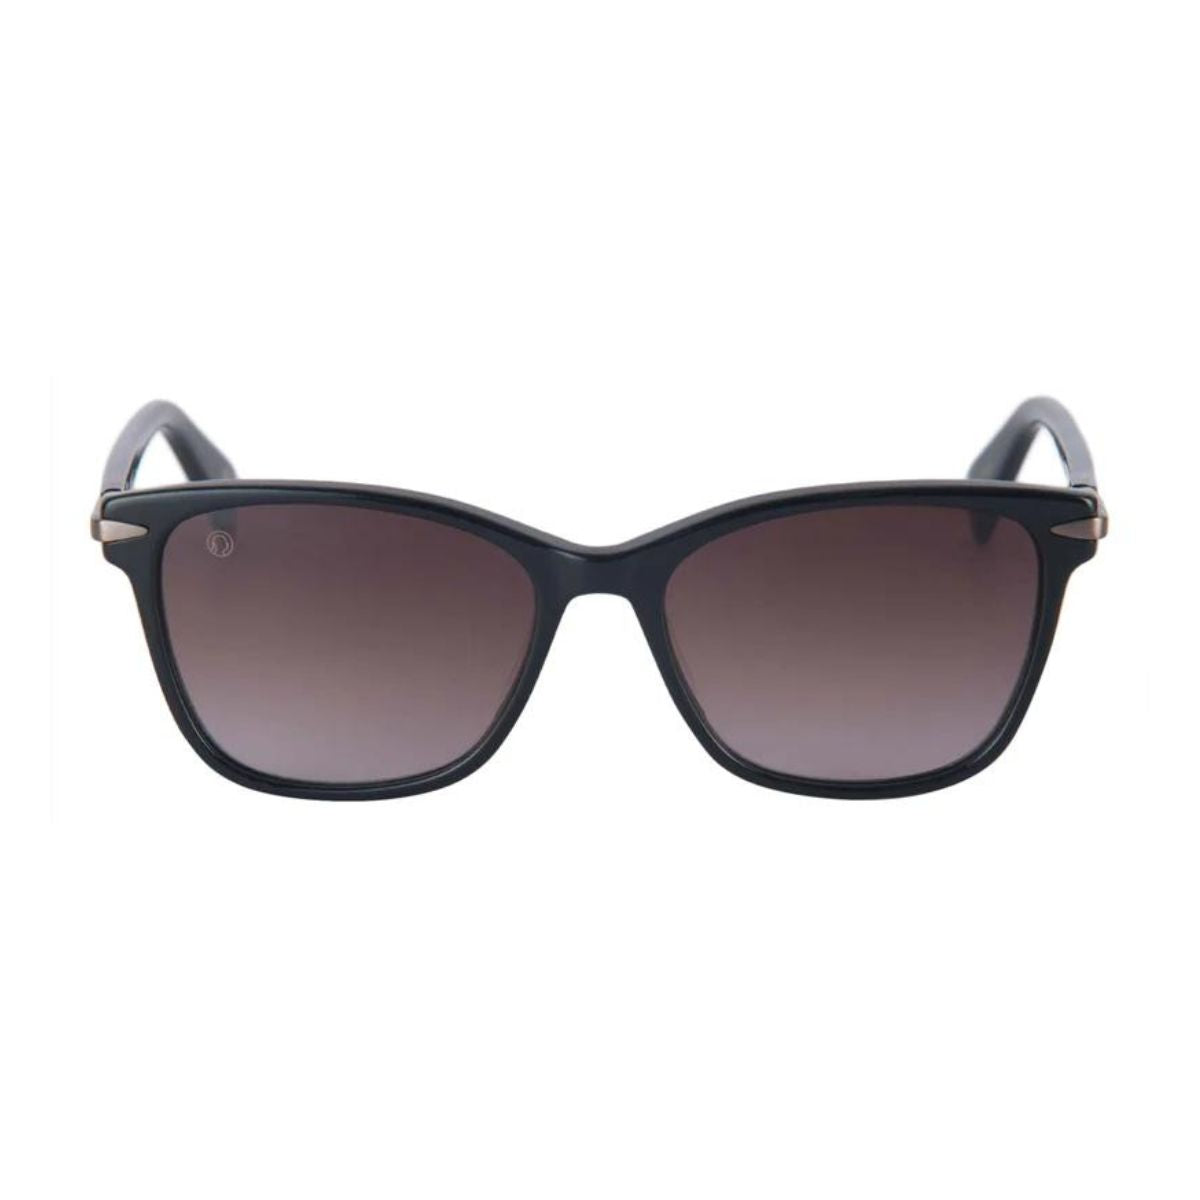 "The Monk Florence C1 Women's UV Safety Sunglasses At Optorium"